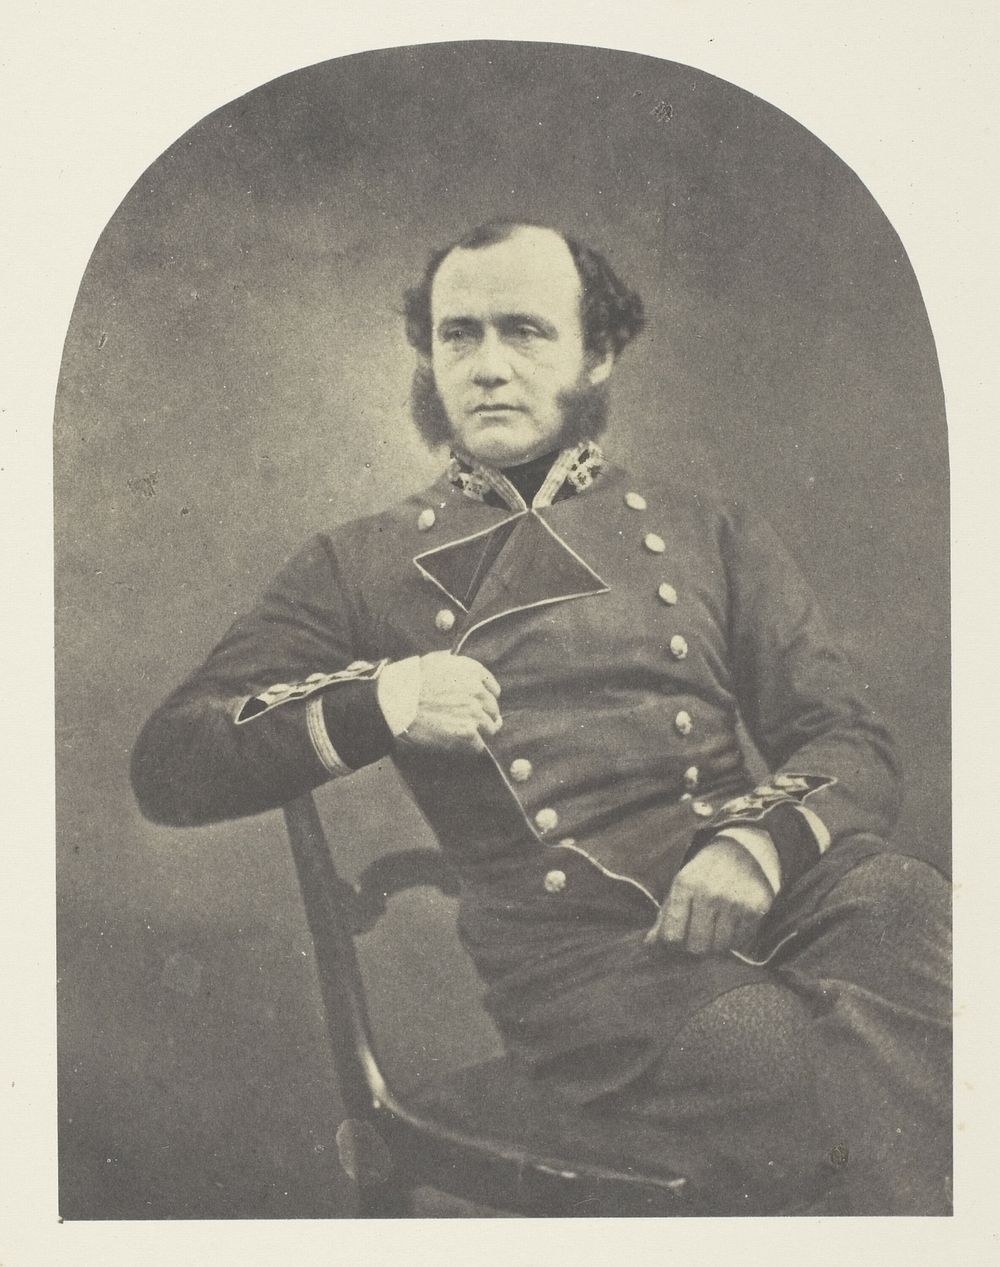 Major Gen'l Charles Ashe Windham by Sharp and Melville